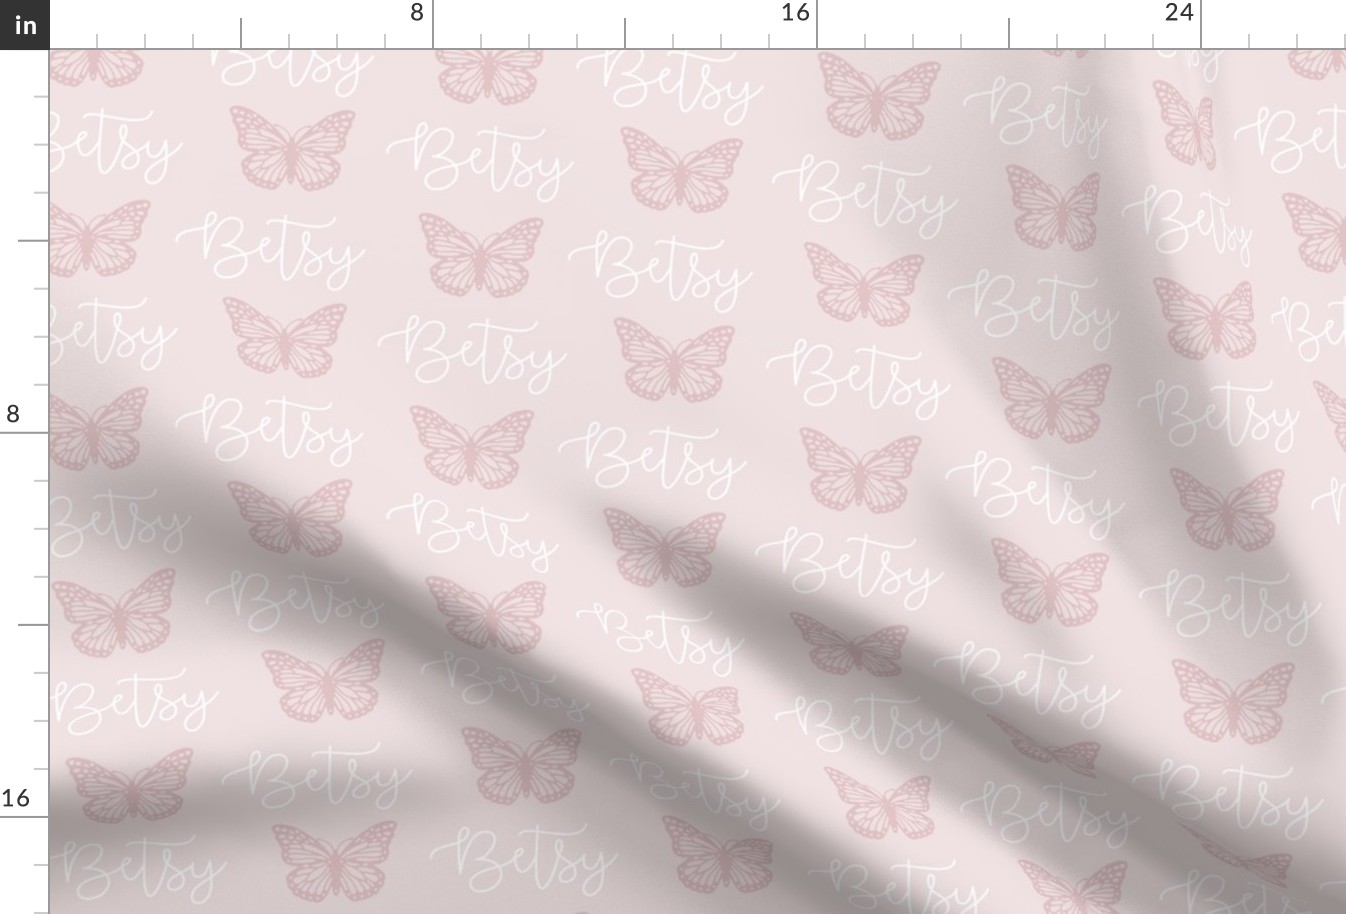 Betsy: Better Together Font + Crepe Butterflies